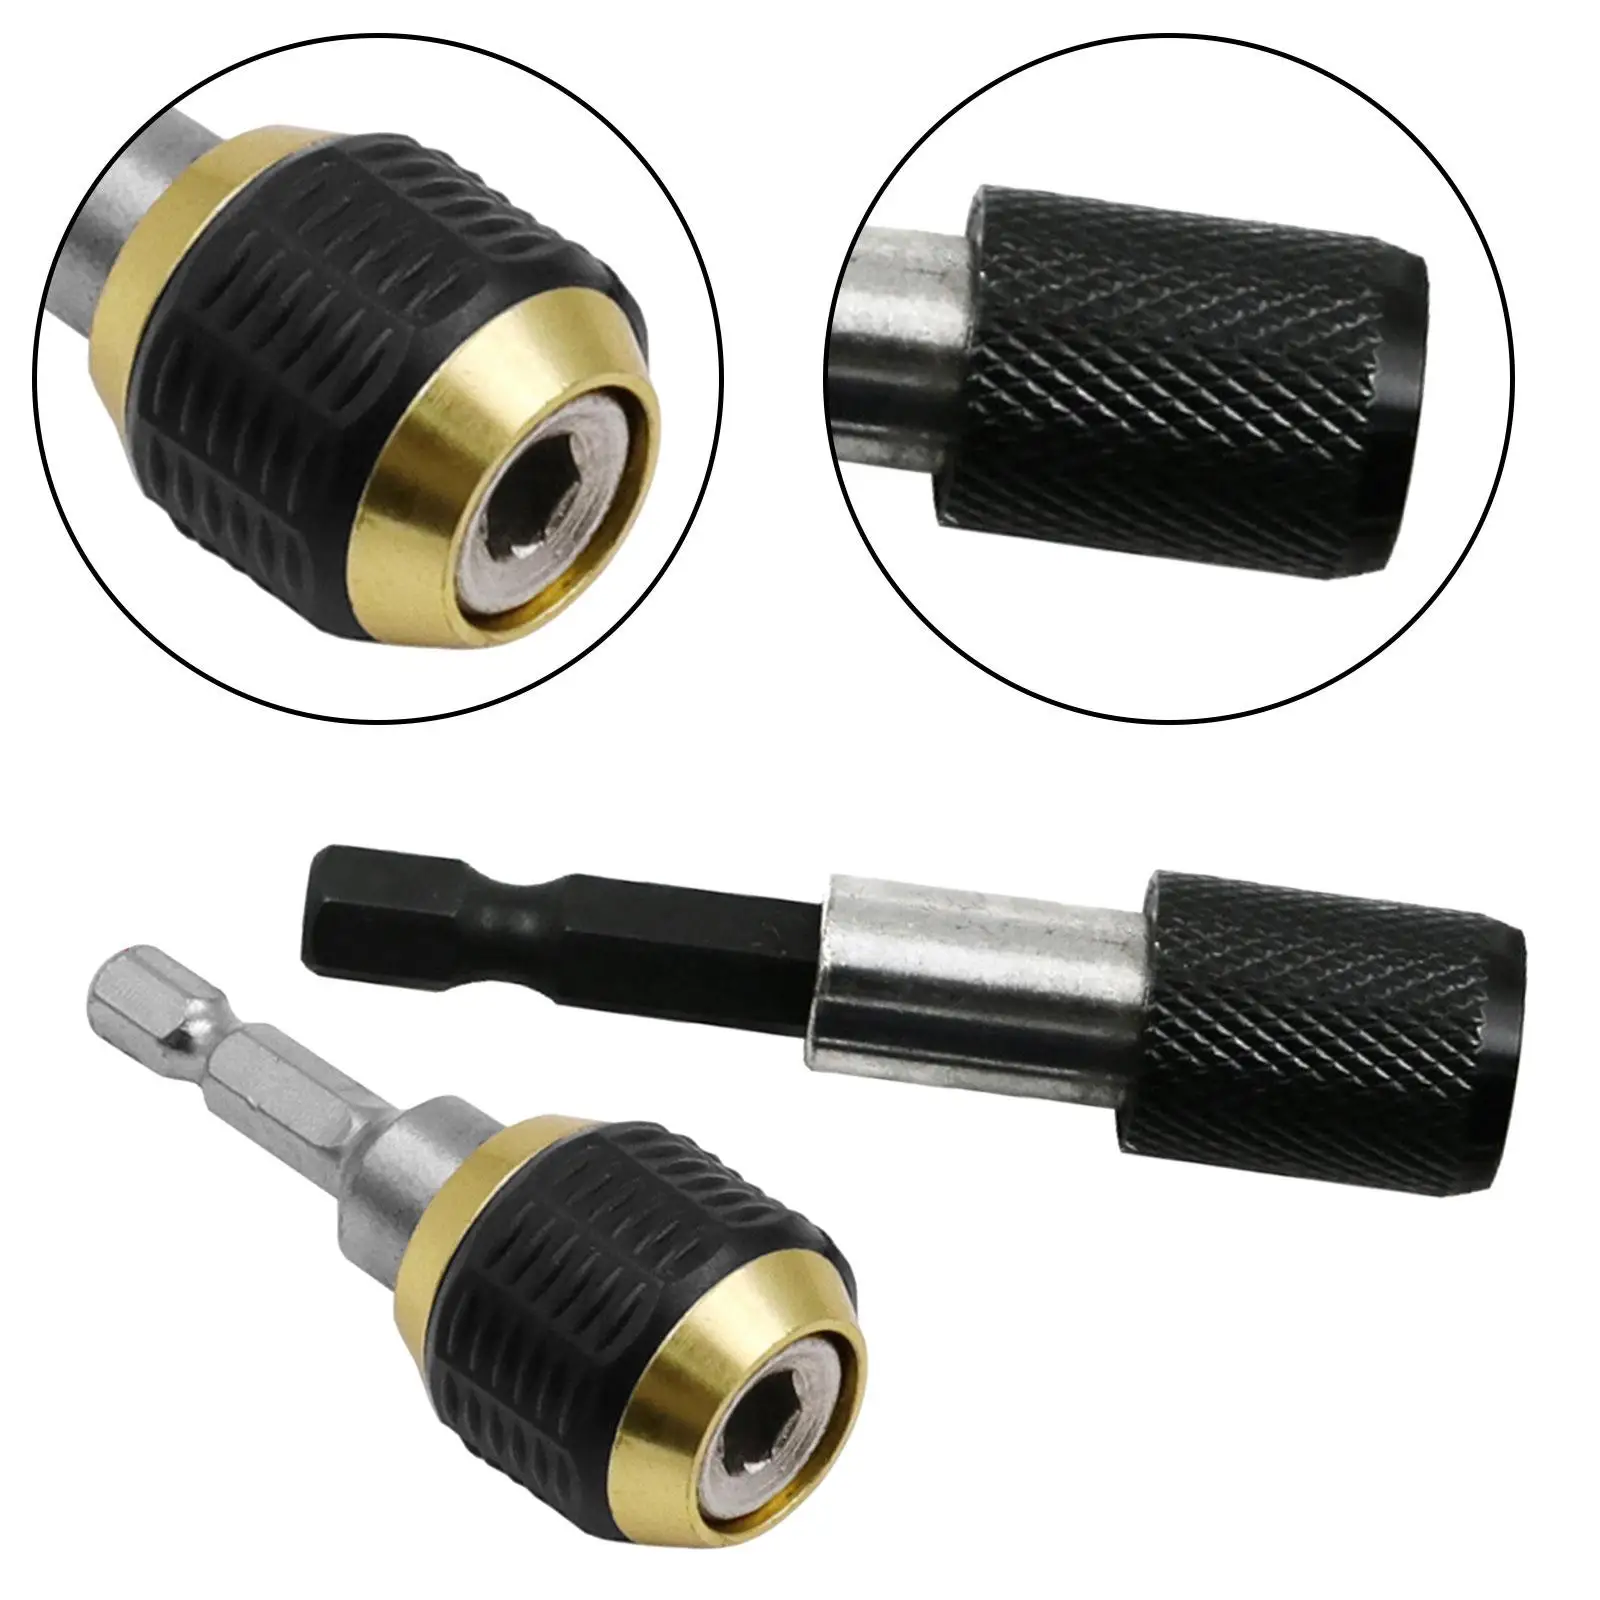 Universal Drill Change Adapter Easily Install Protection Conversion Tool Drill Chuck Drill Driver Bits Tool for Direct Replaces